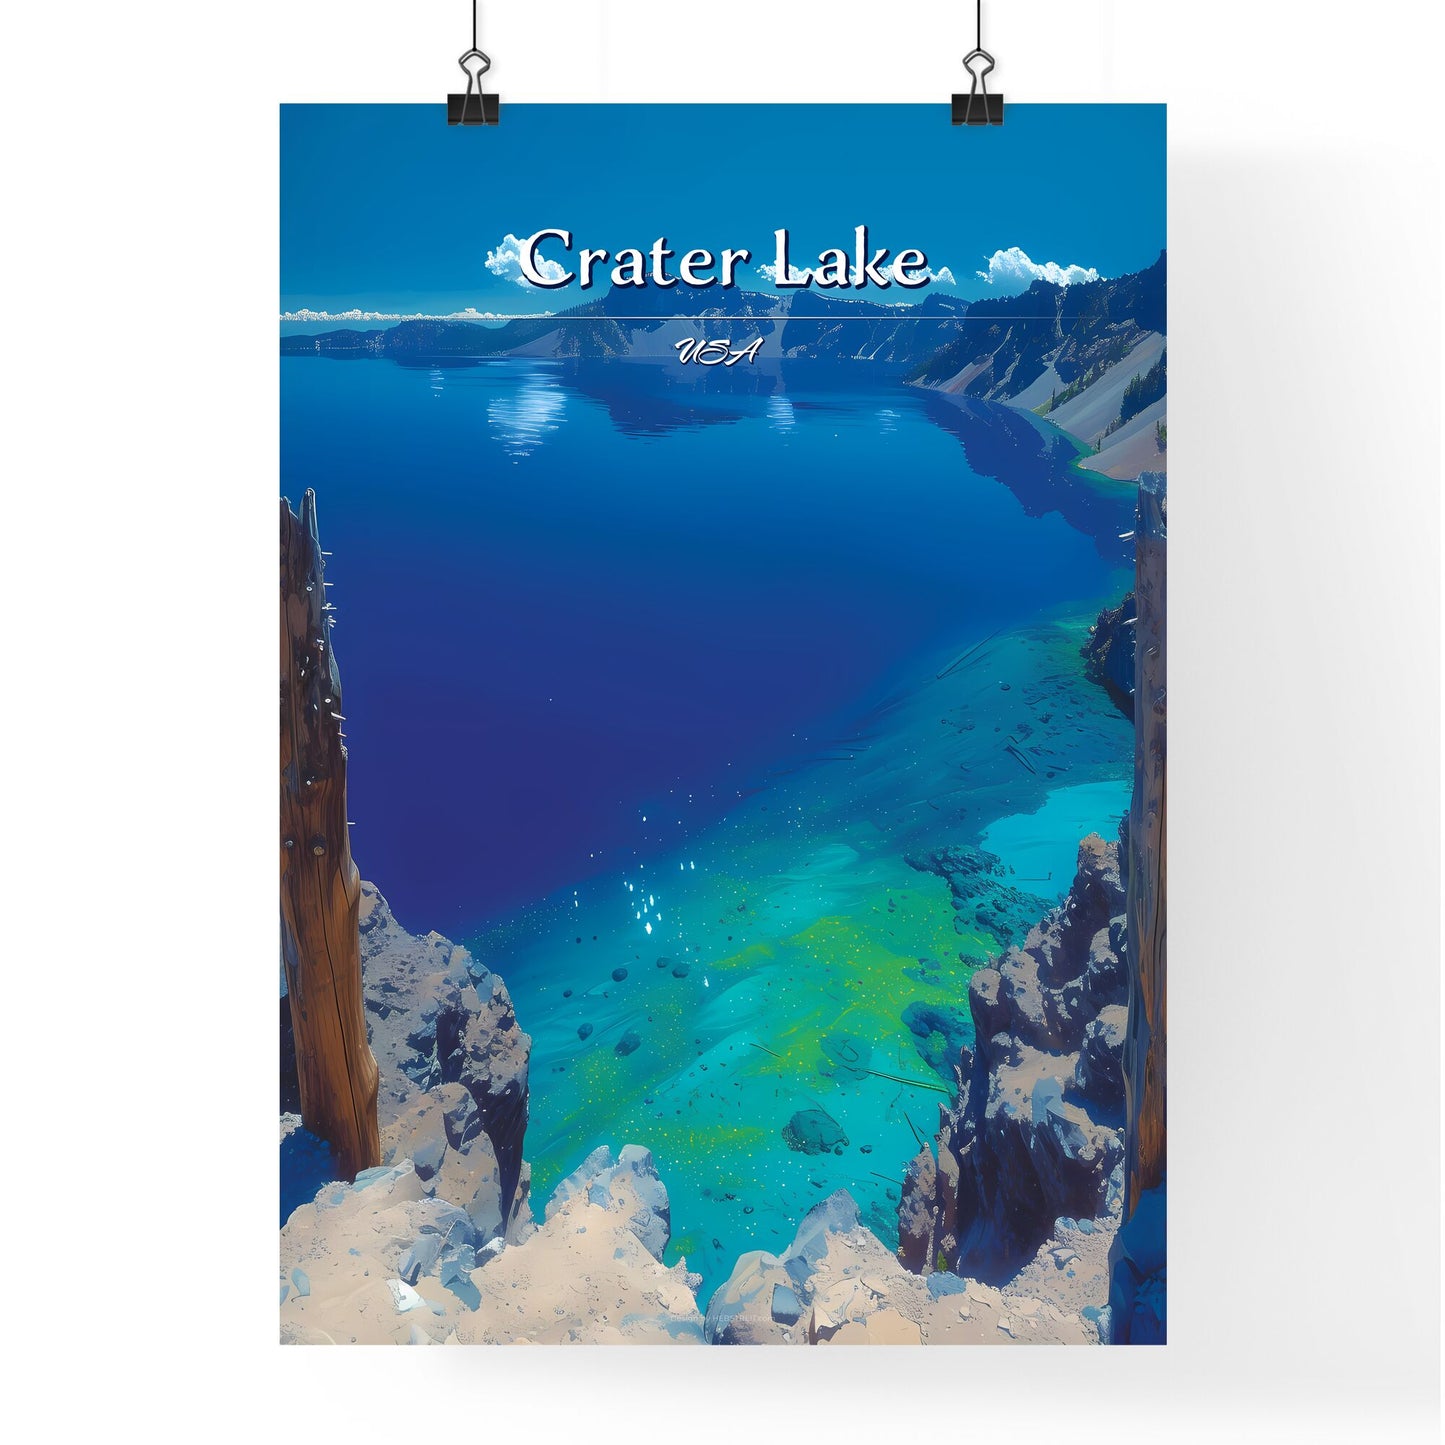 Crater Lake, USA - Art print of a blue lake with rocks and trees Default Title